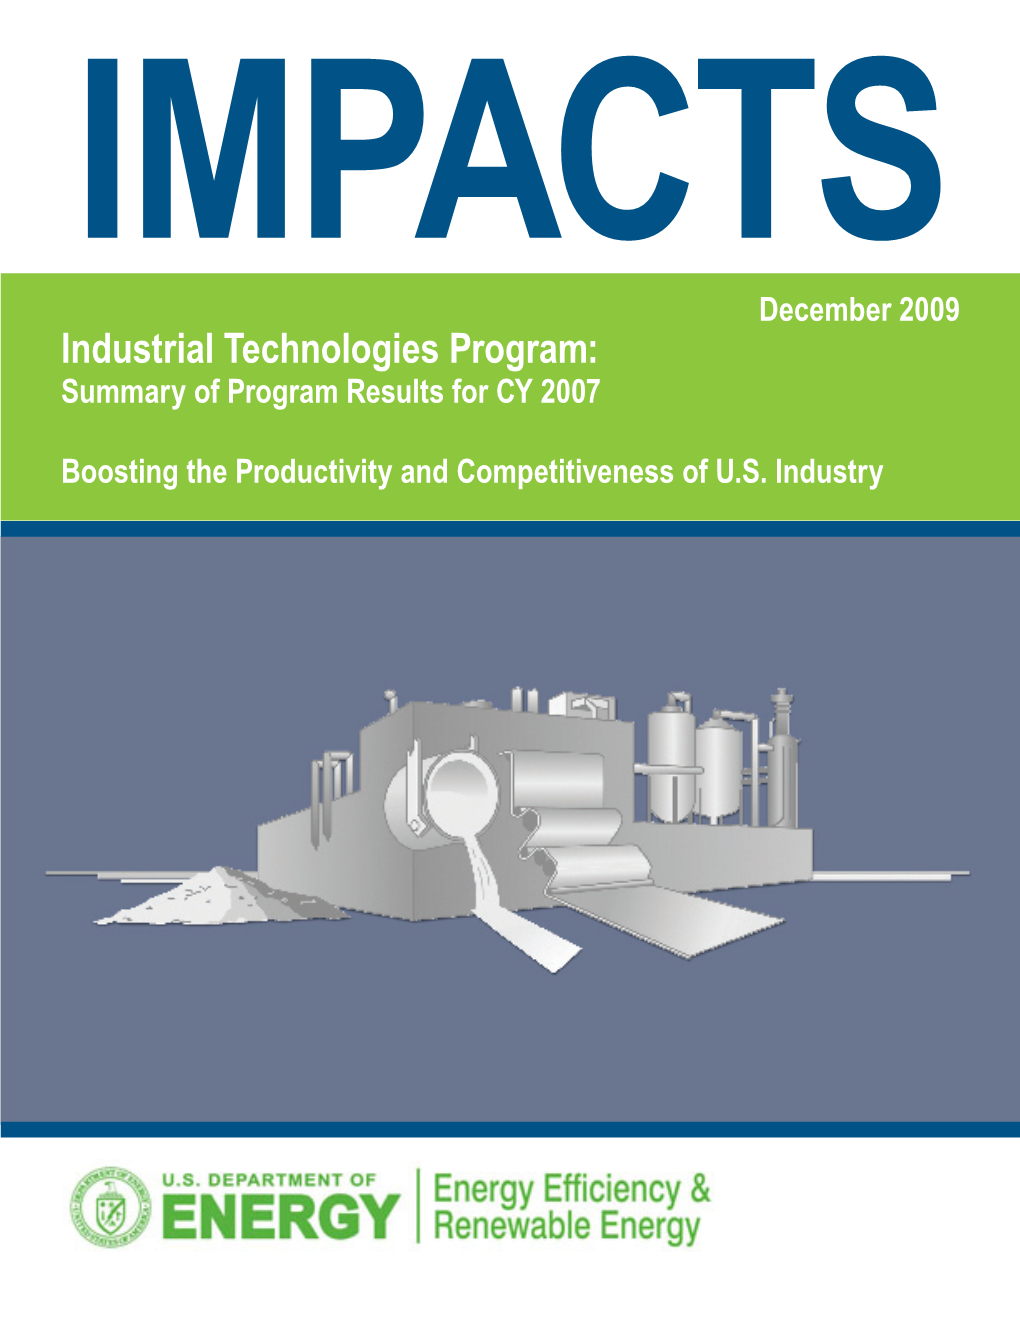 IMPACTS December 2009 Industrial Technologies Program: Summary of Program Results for CY 2007